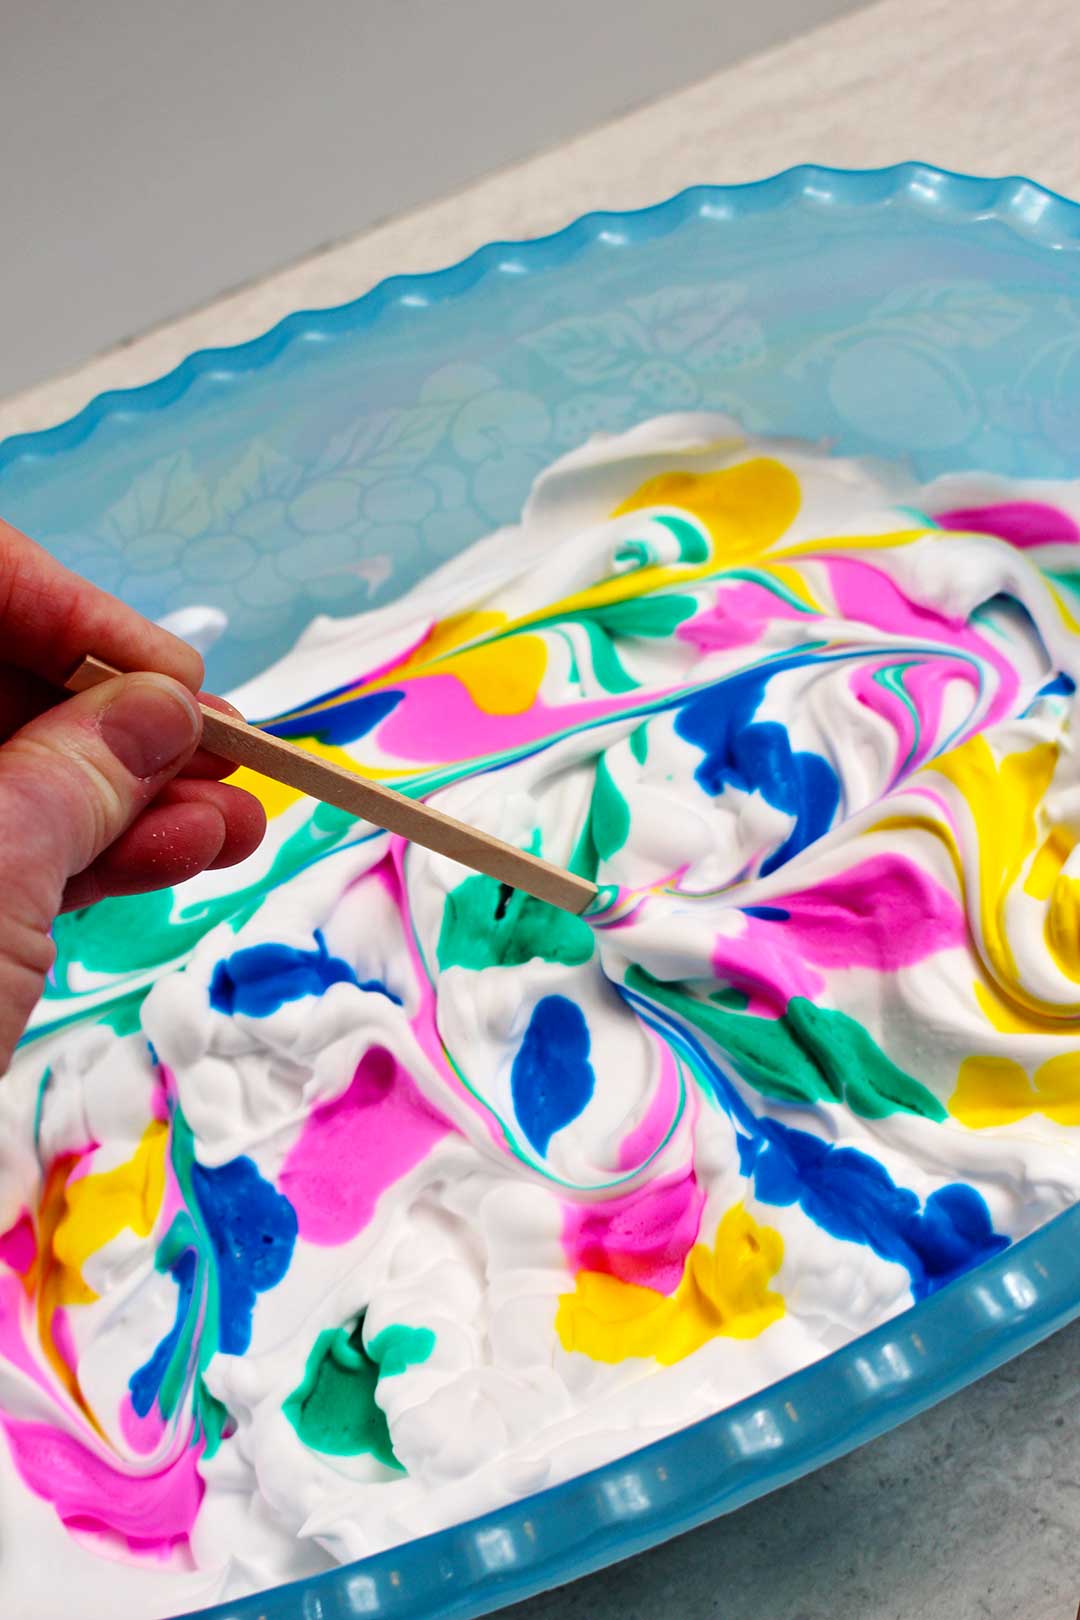 A popsicle stick swirling pink, green, yellow and blue dye in a tub of shaving cream.